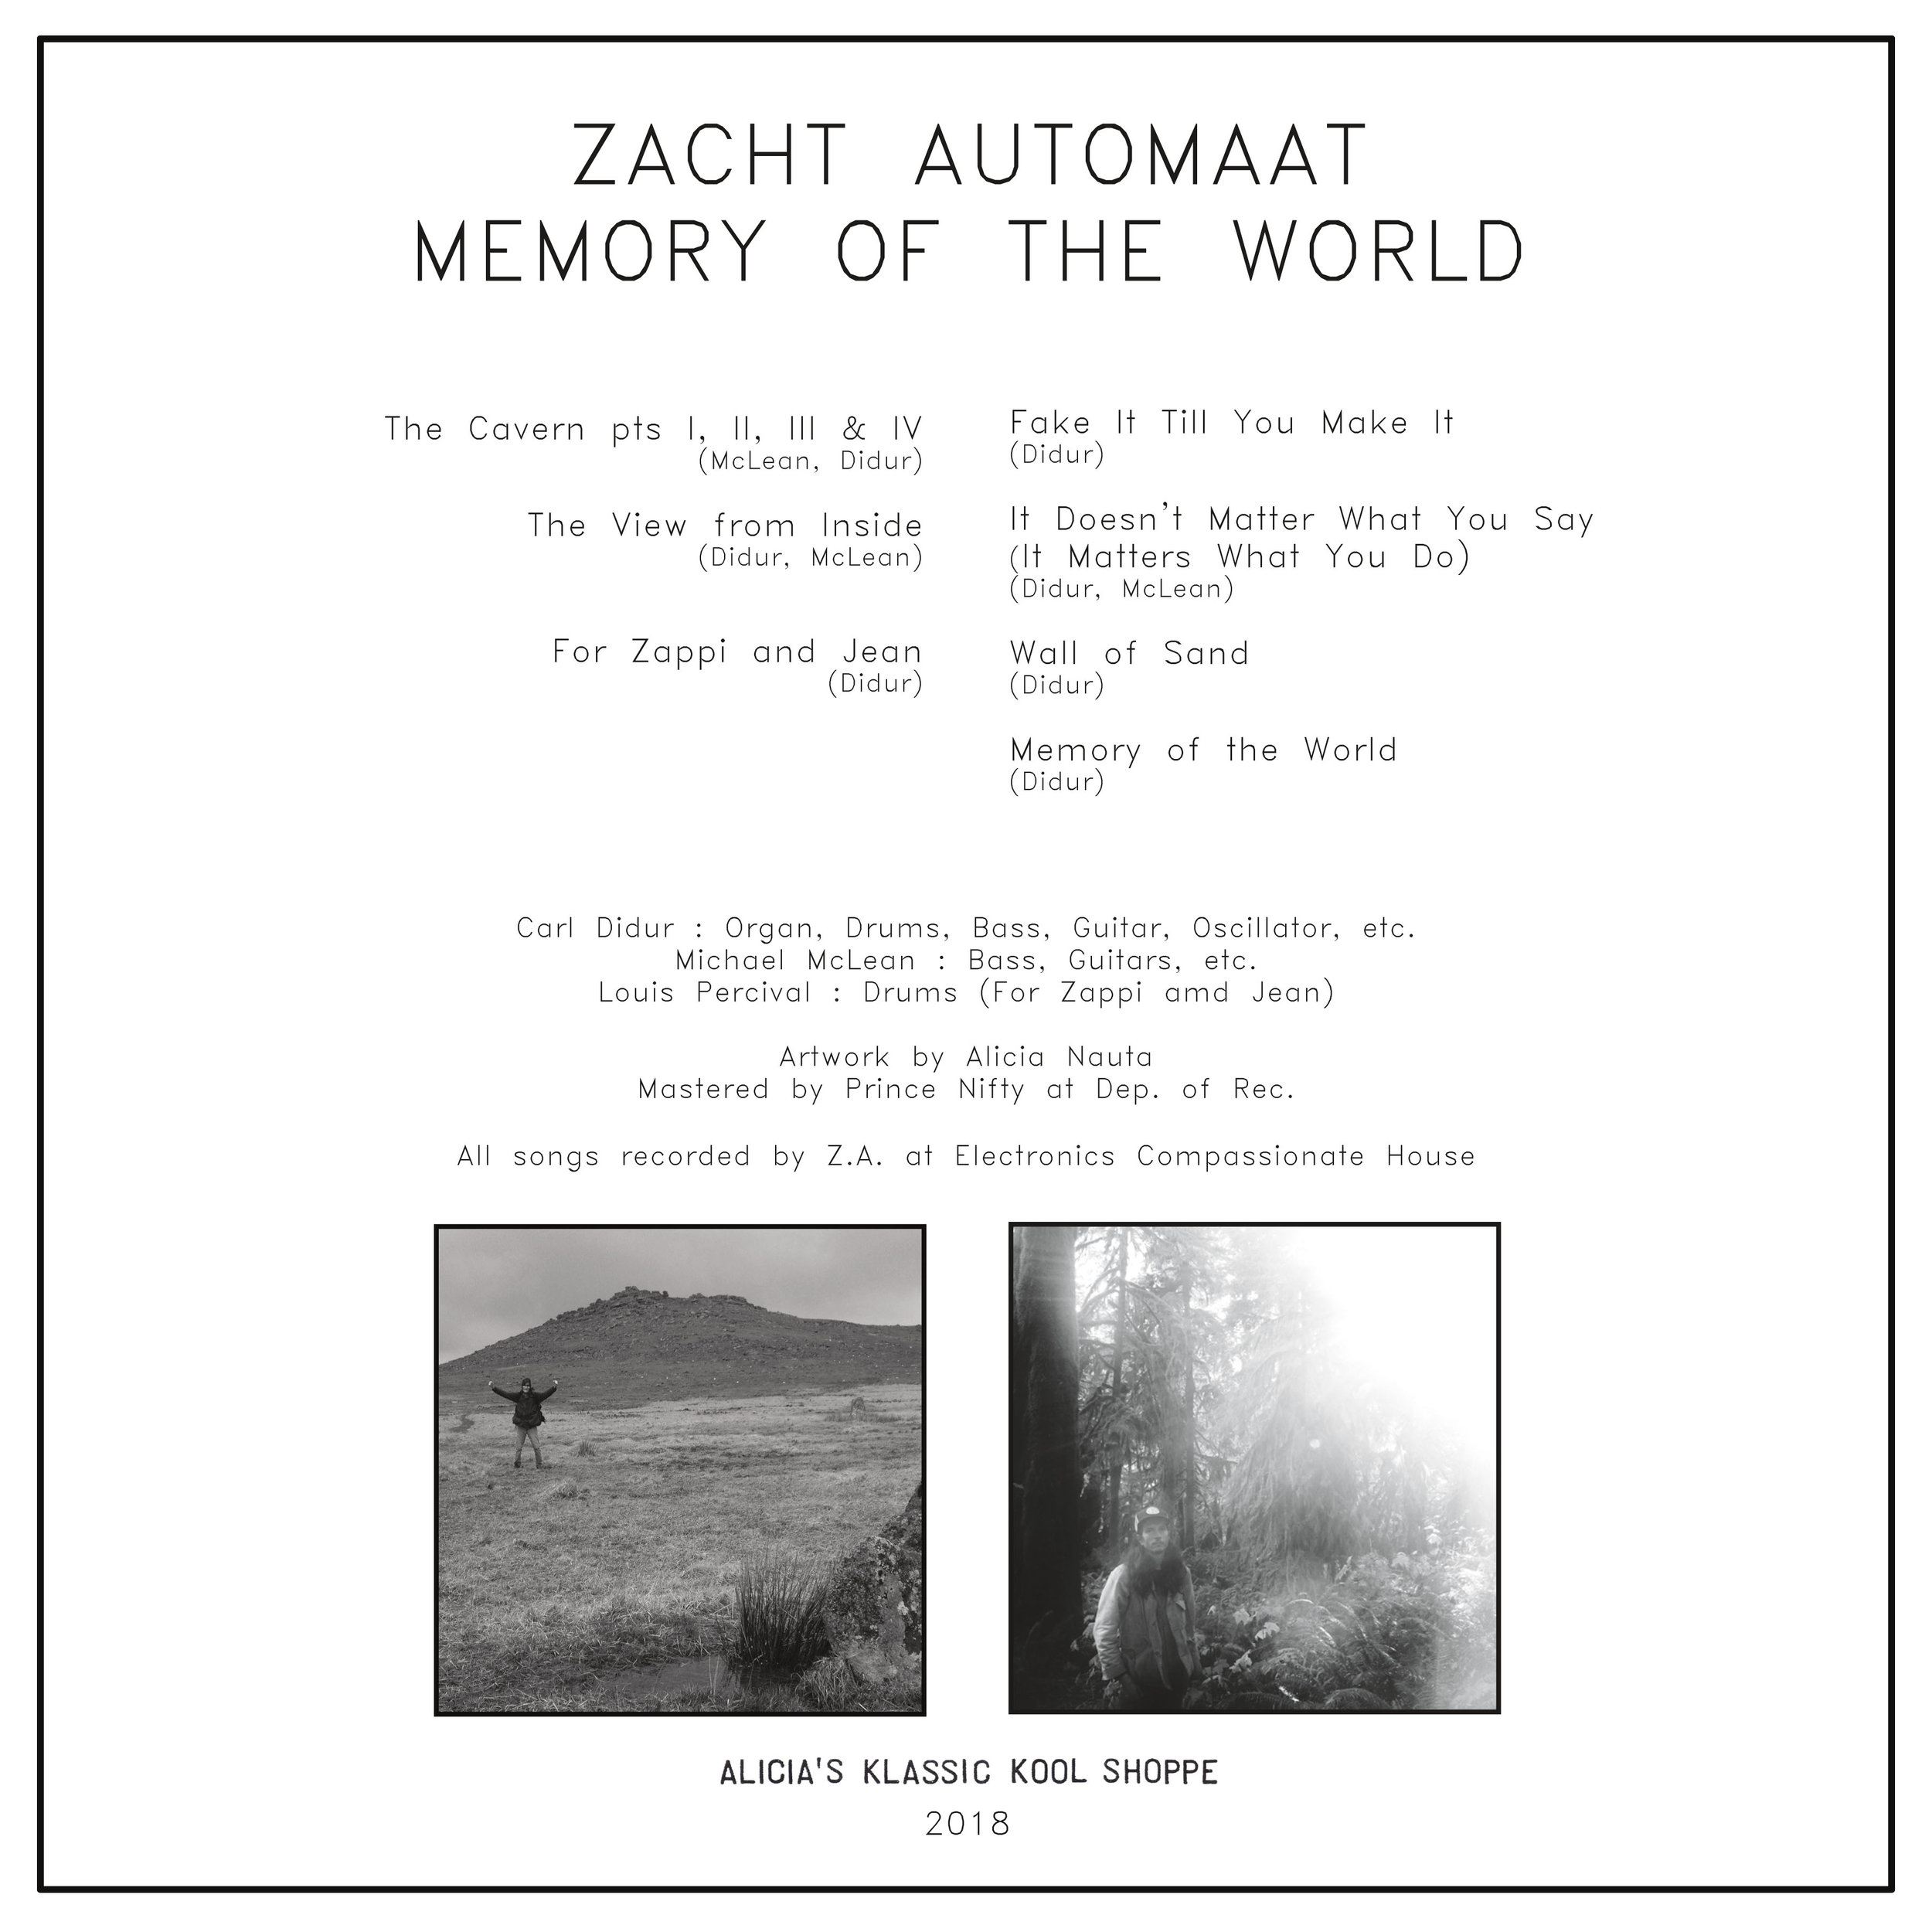  back cover  Zacht Automaat, Memory of the World 12” LP  2018 